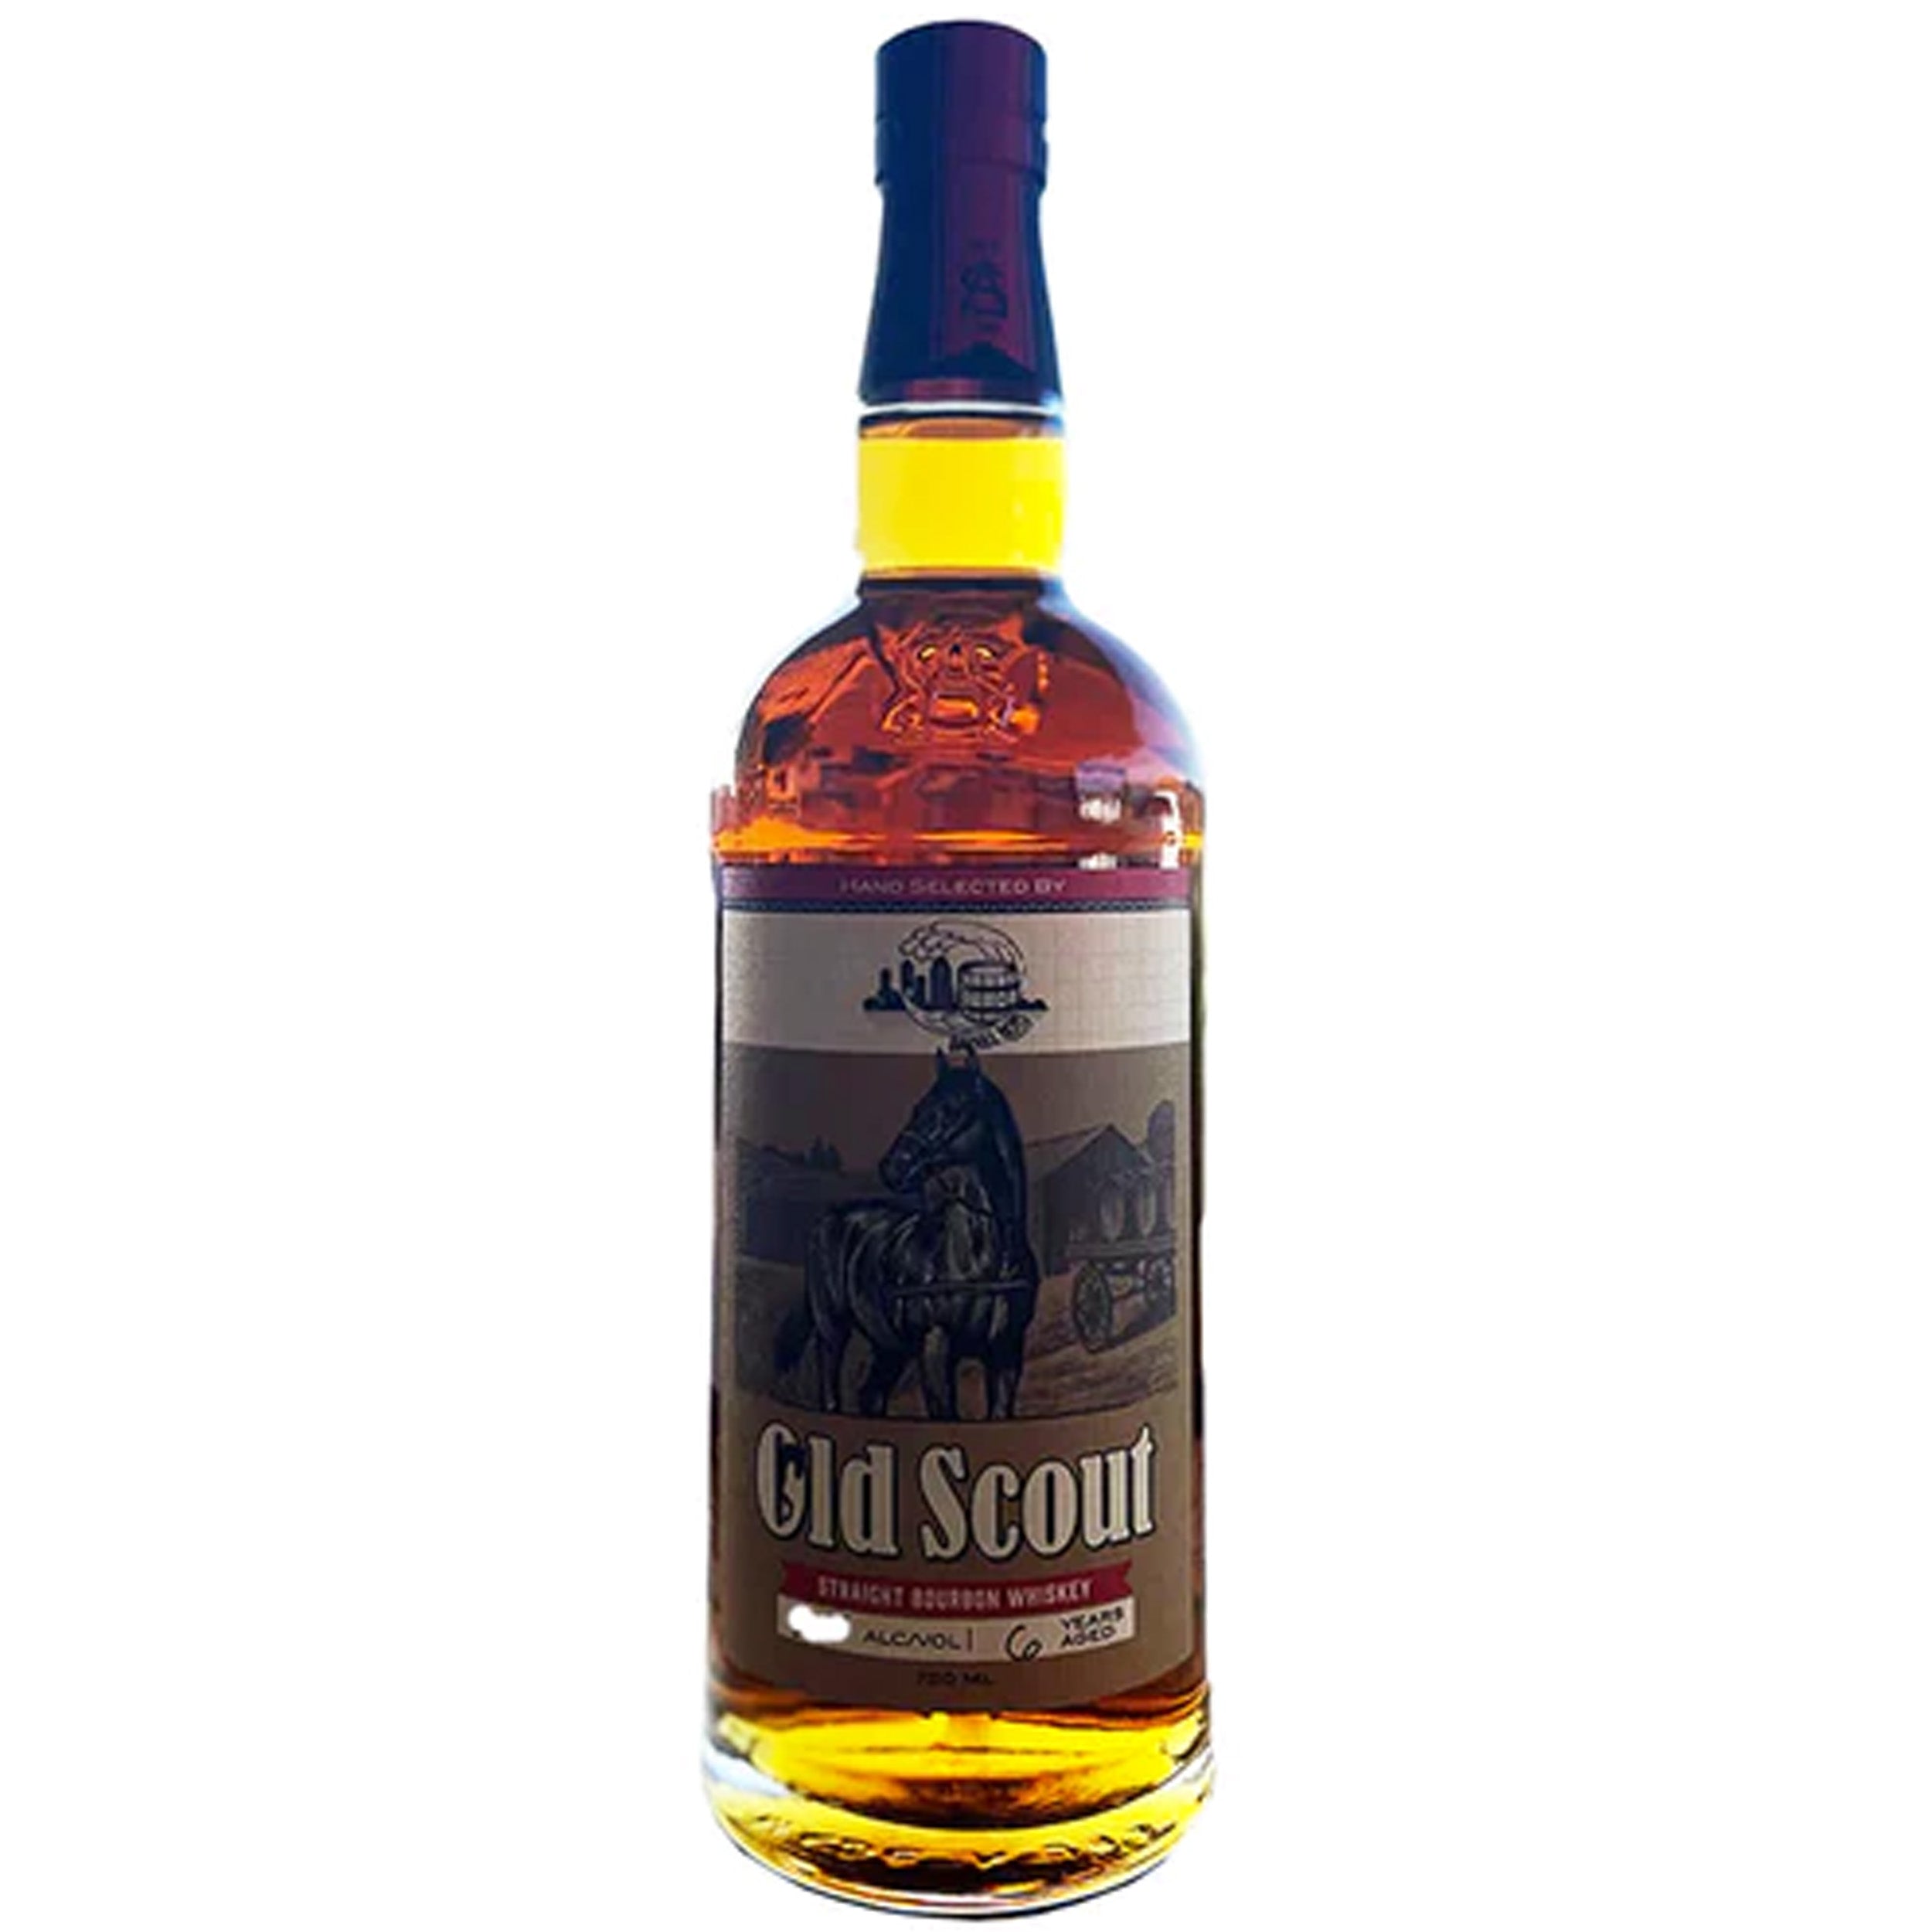 - Smooth Old Year Chips 6 – Barrel #24509 Single Whiskey Ambler Scout Bourbon Liquor